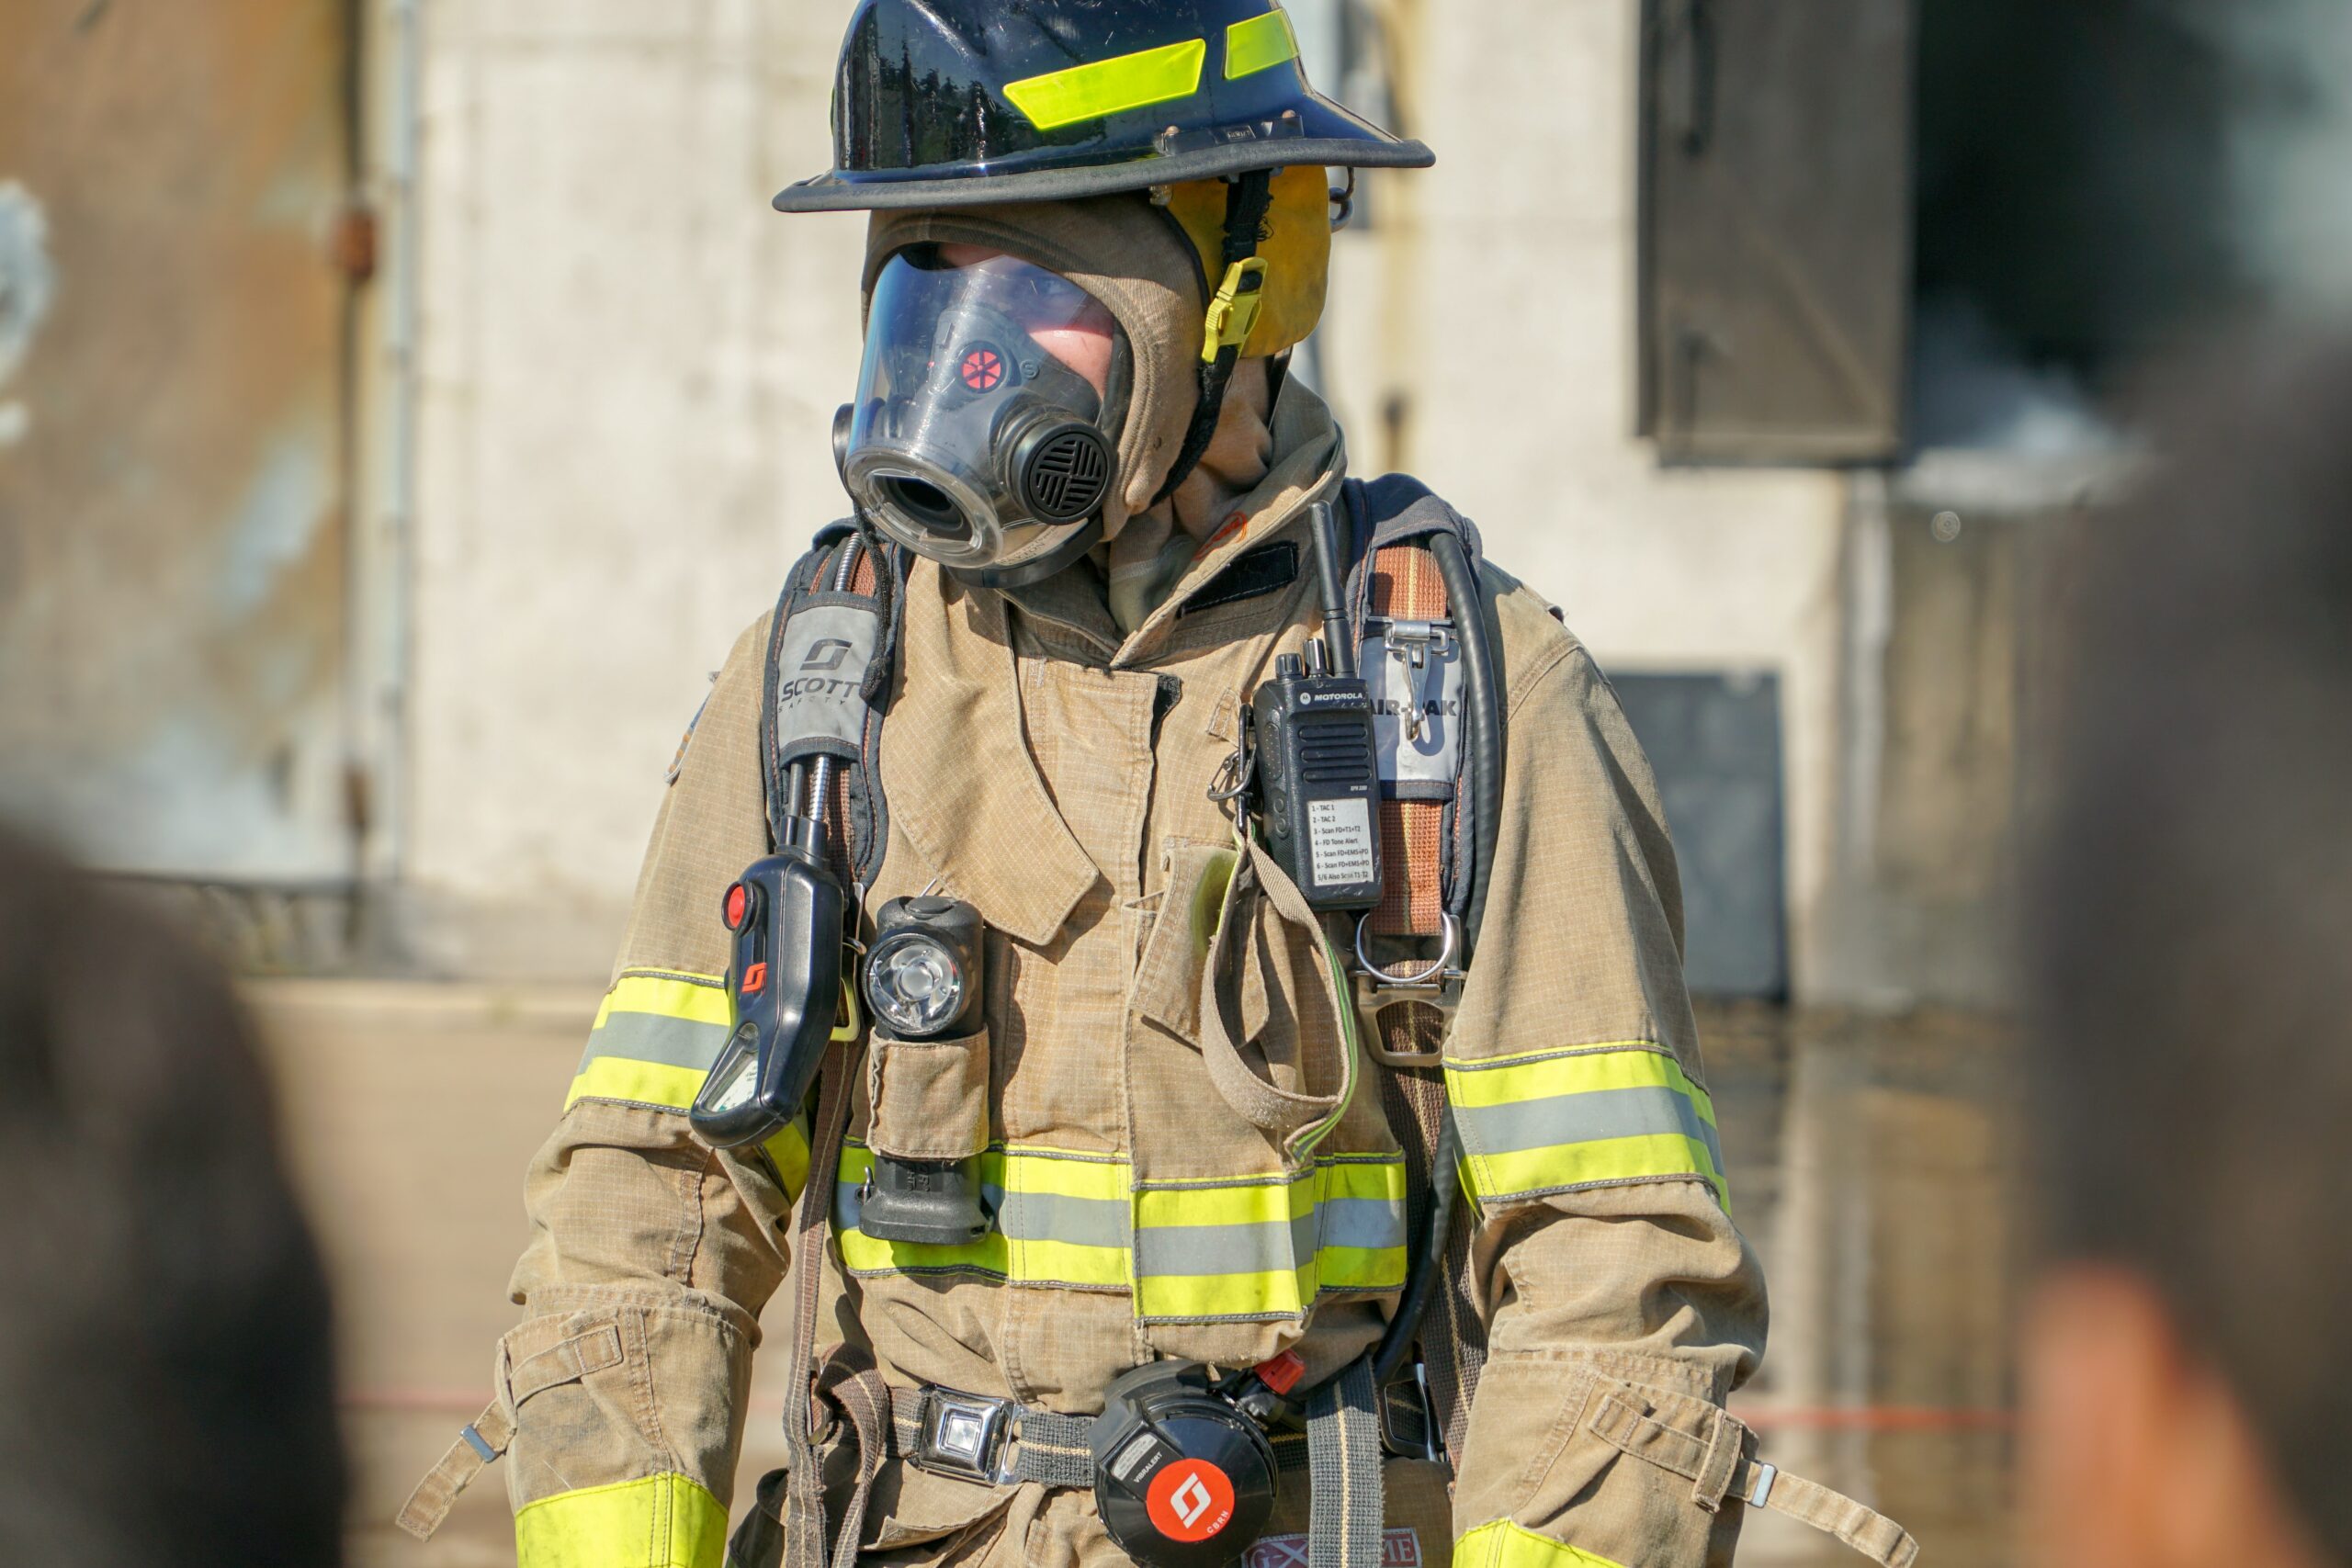 Firefighter with gear on